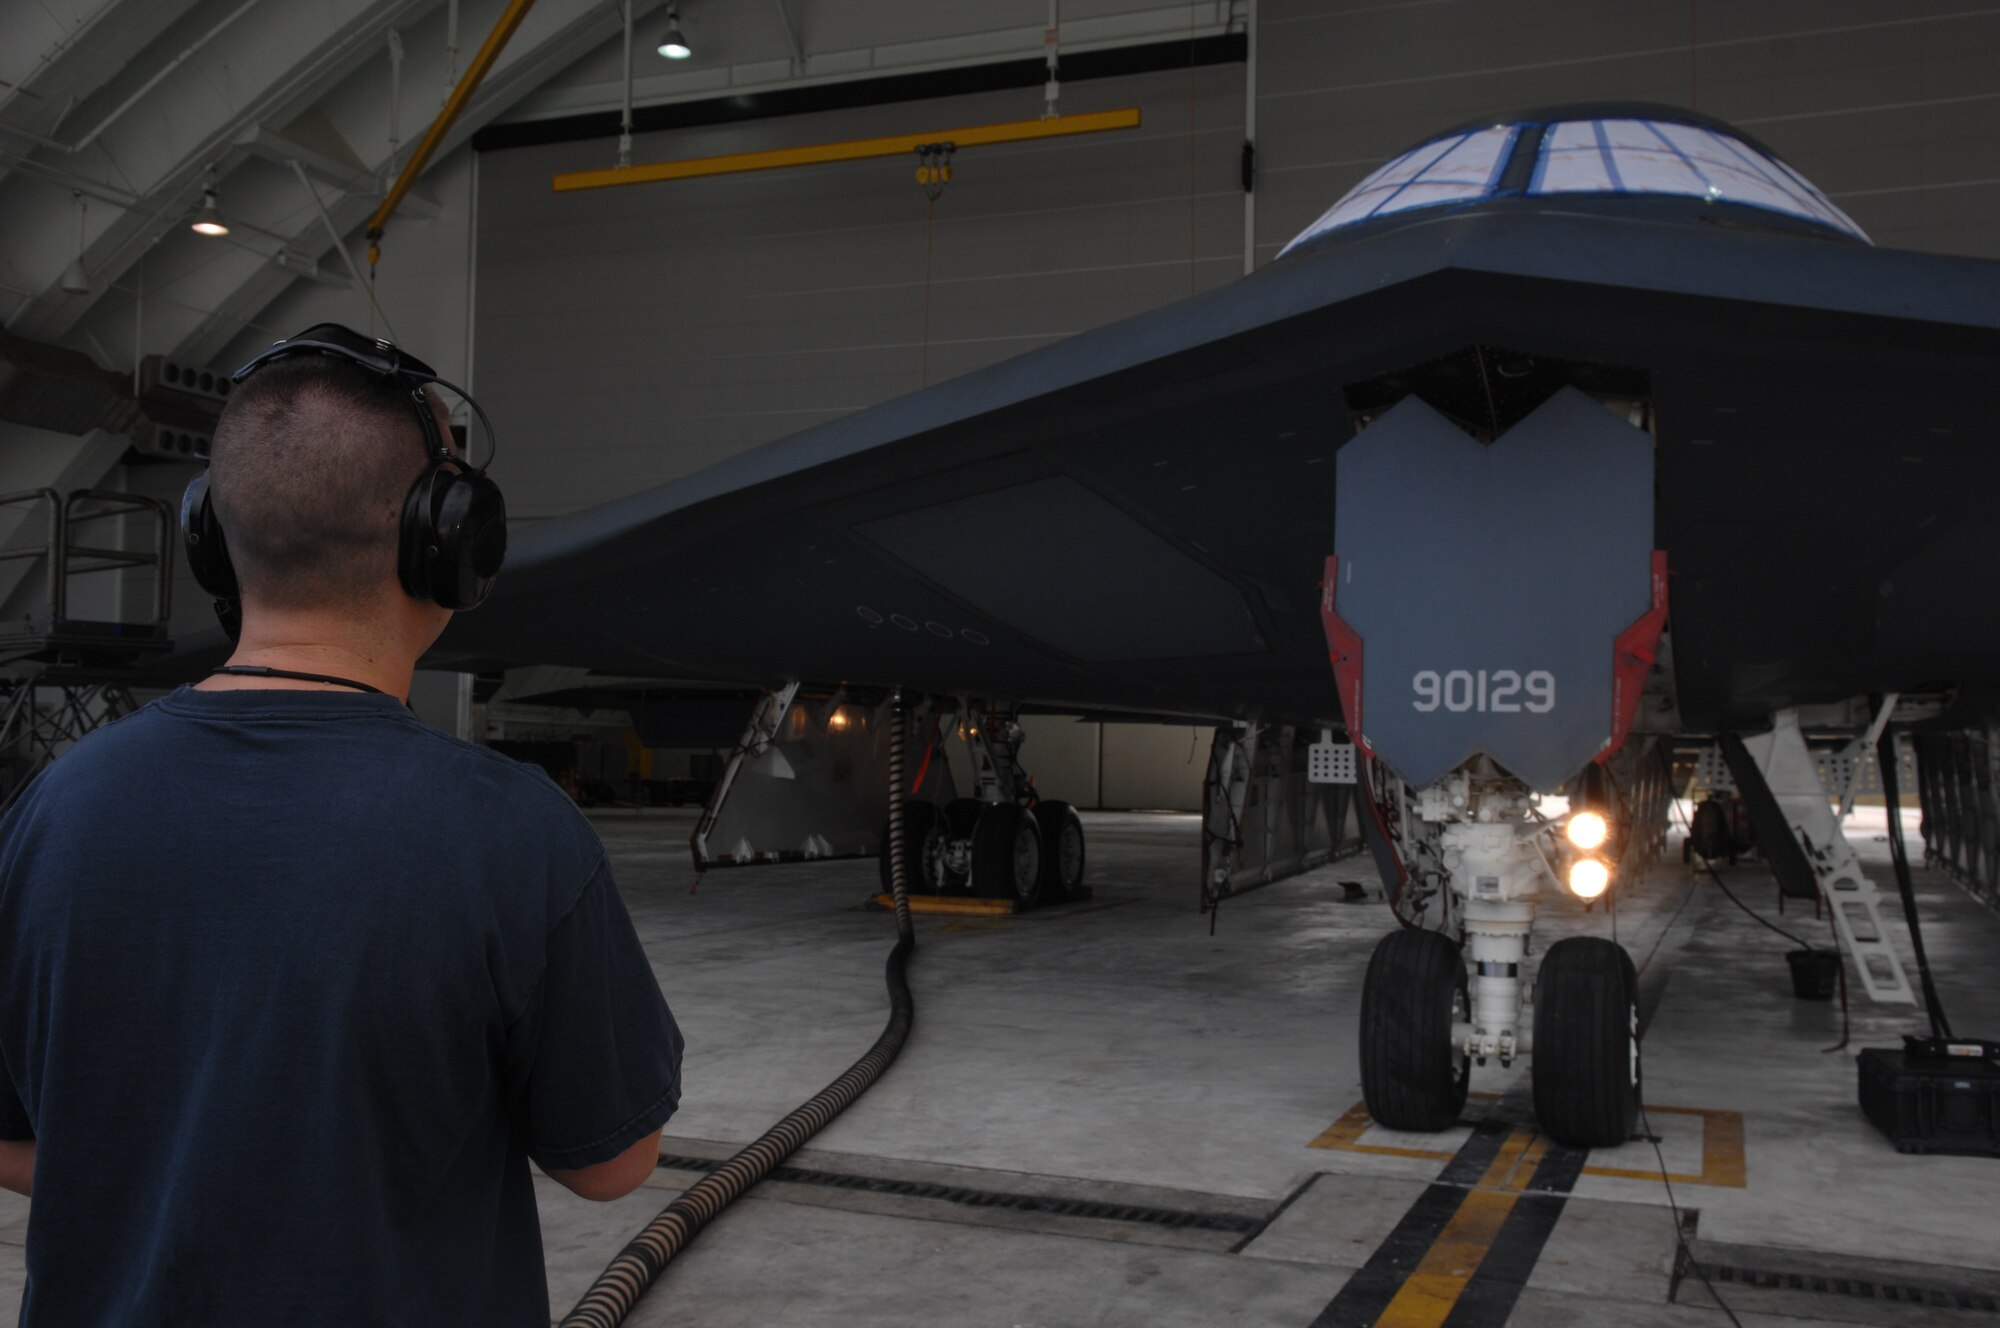 ANDERSEN AIR FORCE BASE, Guam -- Staff Sergeant Jonathan Sangricco communicates with the B-2 Spirit stealth bomber’s cockpit while they test head lights as part of routine pre-flight maintenance. Sergeant Sangricco is part of a maintenance team supporting the remaining B-2 Spirits at Andersen AFB. Keeping the B-2 Spirit bomber at a mission-ready status requires lots of hard work and a huge team effort by all maintainers working on the multi-role stealth bomber. The B-2s here have remained suspended pending the results from a safety investigation board following the first-ever crash of a stealth bomber Feb. 23 here, at Andersen AFB. The continuous bomber presence demonstrates U.S. commitment to promote security and stability in the Pacific region. Sergeant Sangricco is with the 36th Expeditionary Aircraft Maintenance Squadron and is deployed from the 509th Bomb Wing, Whiteman, AFB, Mo. (U.S. Air Force photo by Staff Sgt. Vanessa Valentine)


